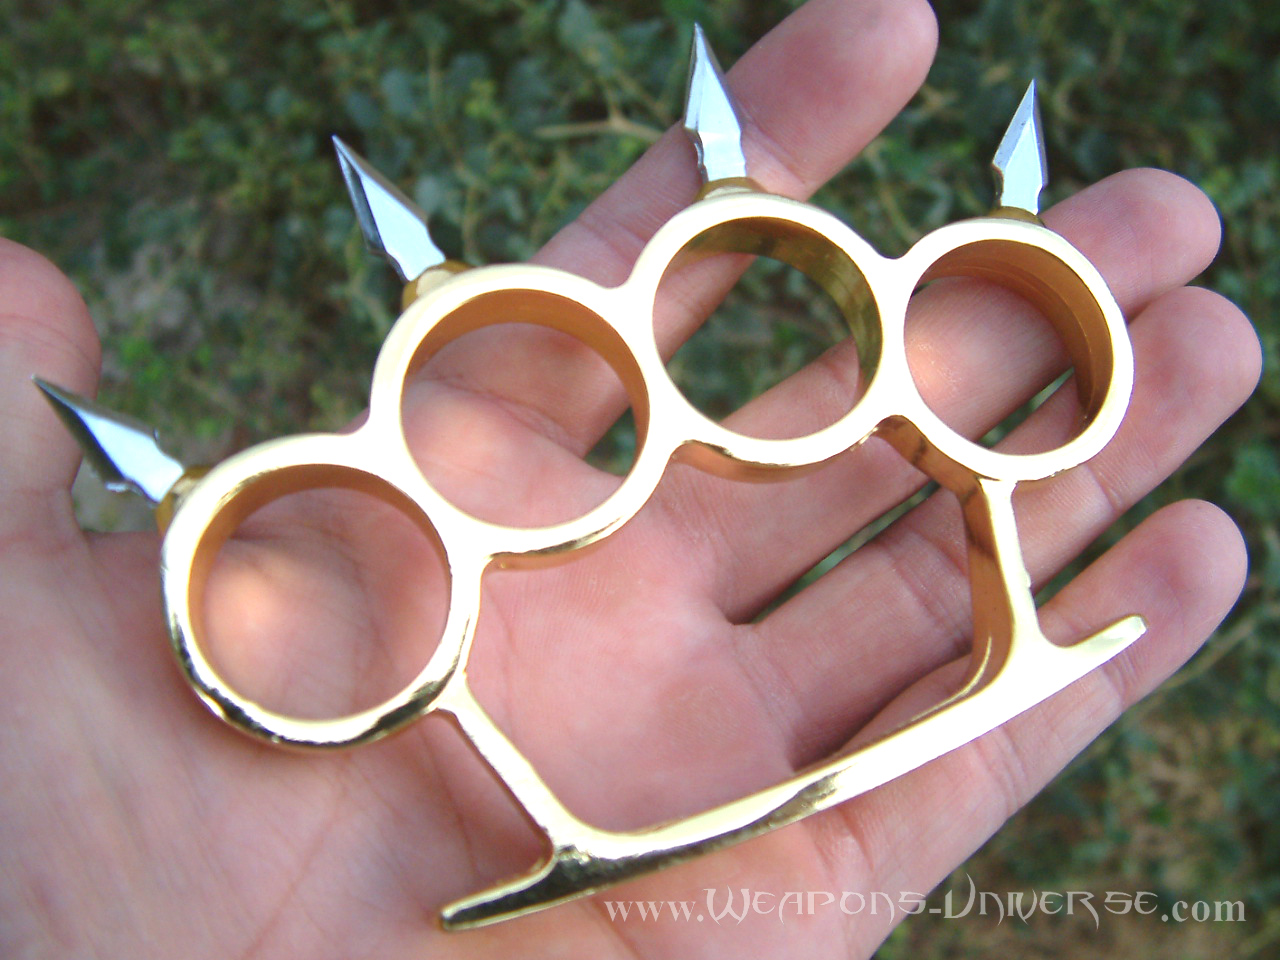 Brass Knuckles Nail Art: How to Make a Statement with Your Nails - wide 2